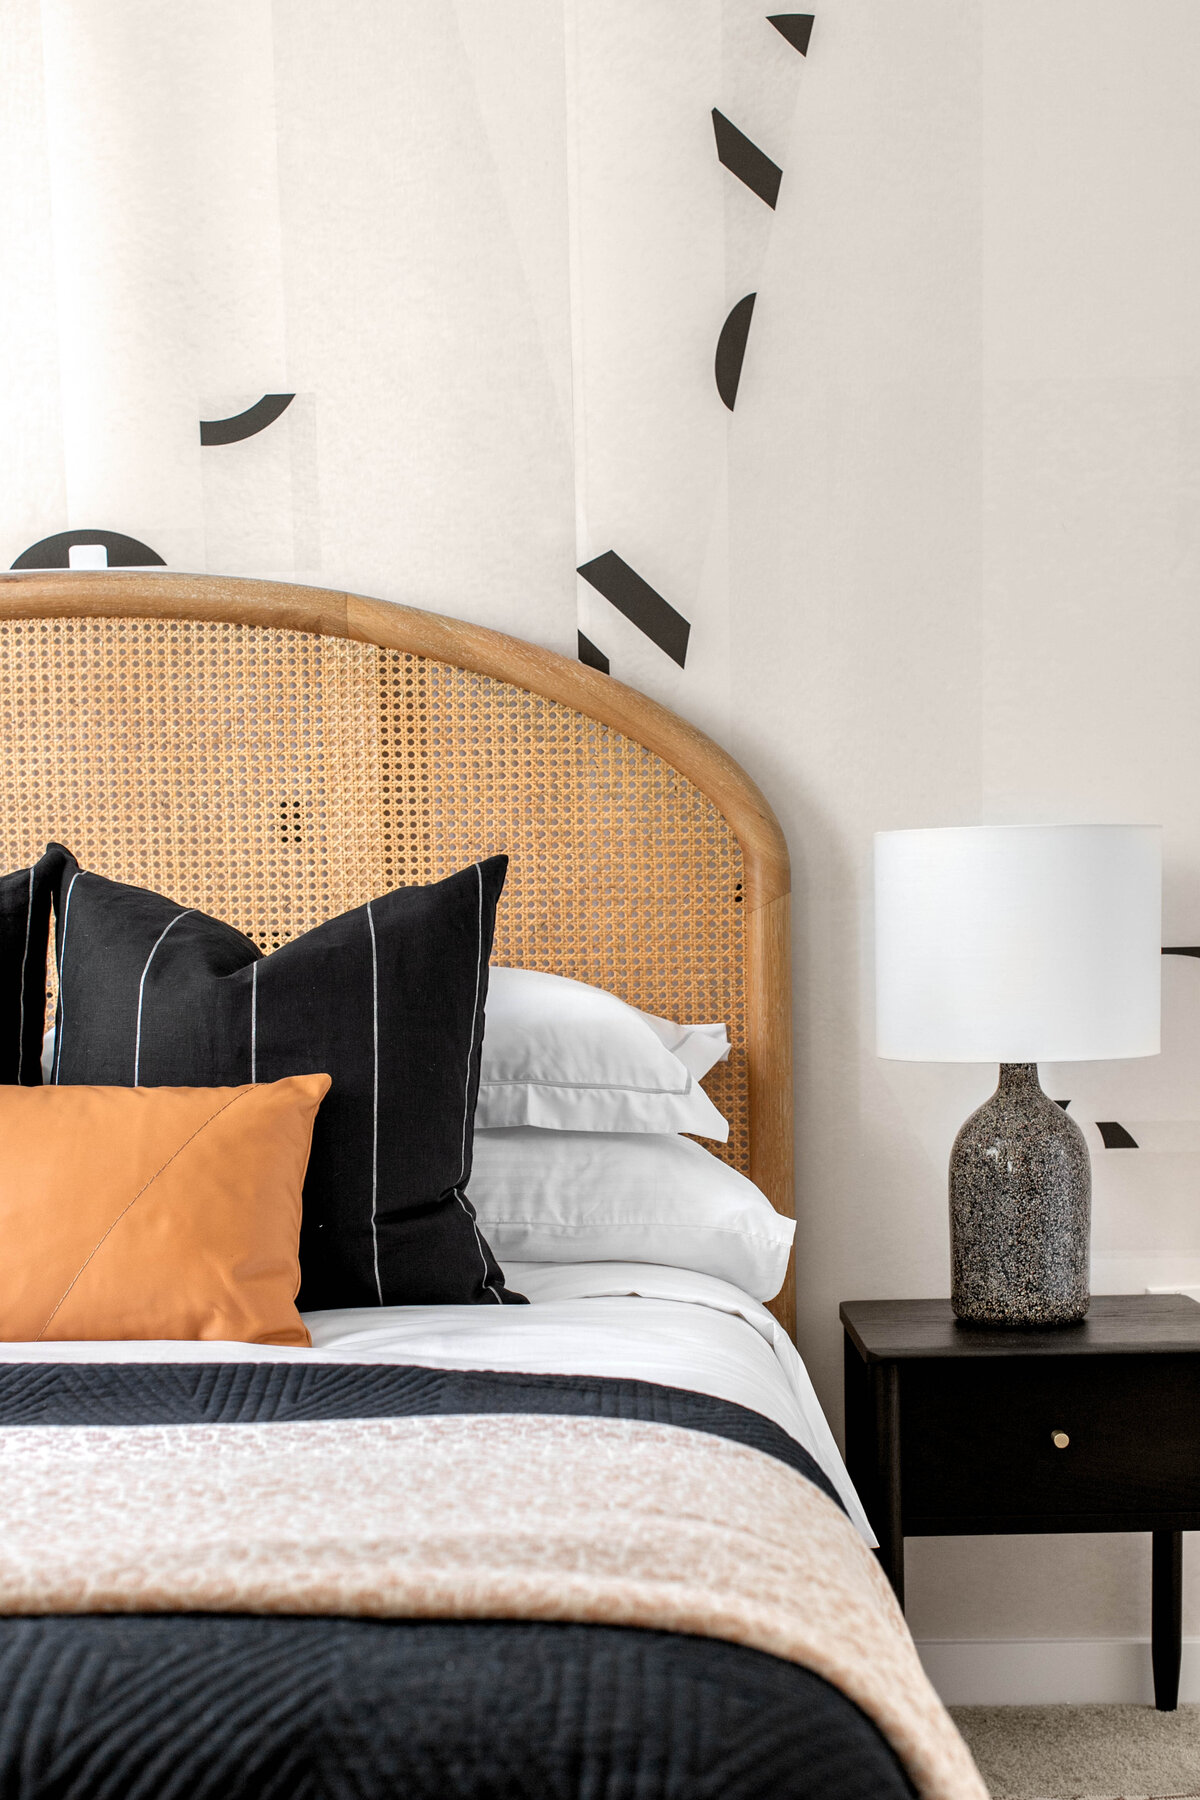 Bedroom featuring abstract geometric pattern wallpaper, cane bed headboard, striped black pillows, leather pillow and terrazzo bedside table lamp on top of black wooden single drawer nightstand